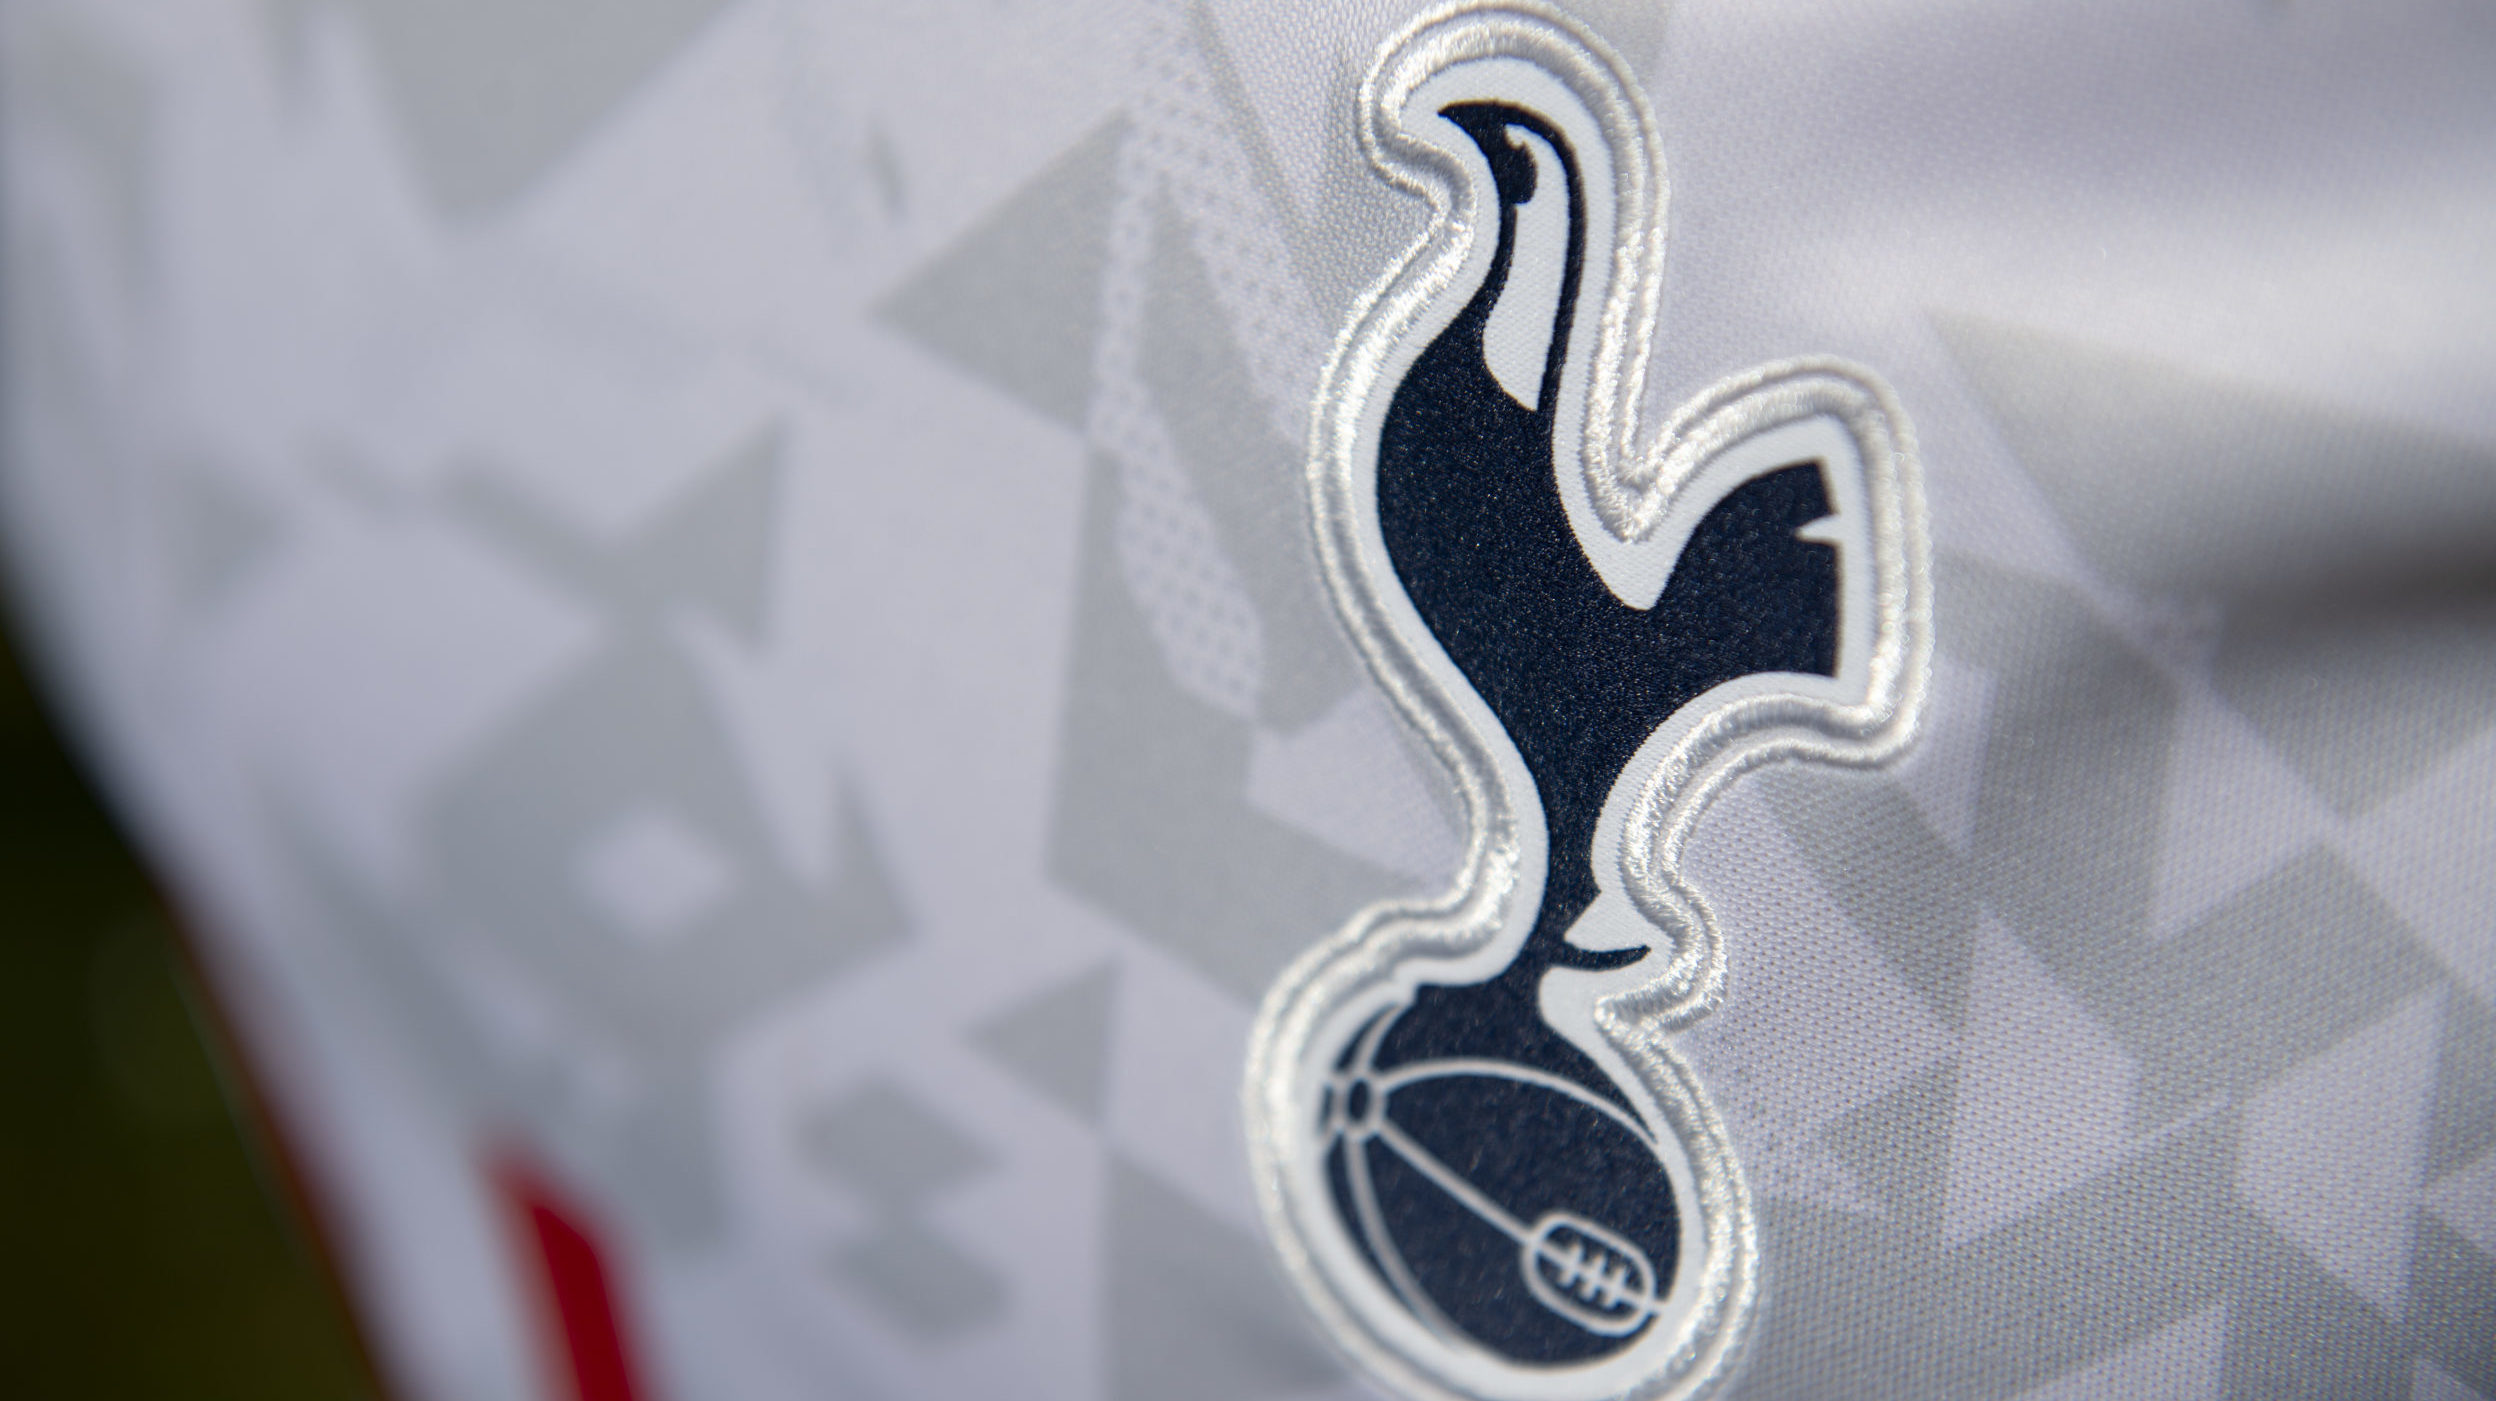 The Tottenham Hotspur home shirt displaying the club badge on May 19, 20201 in Manchester, United K...